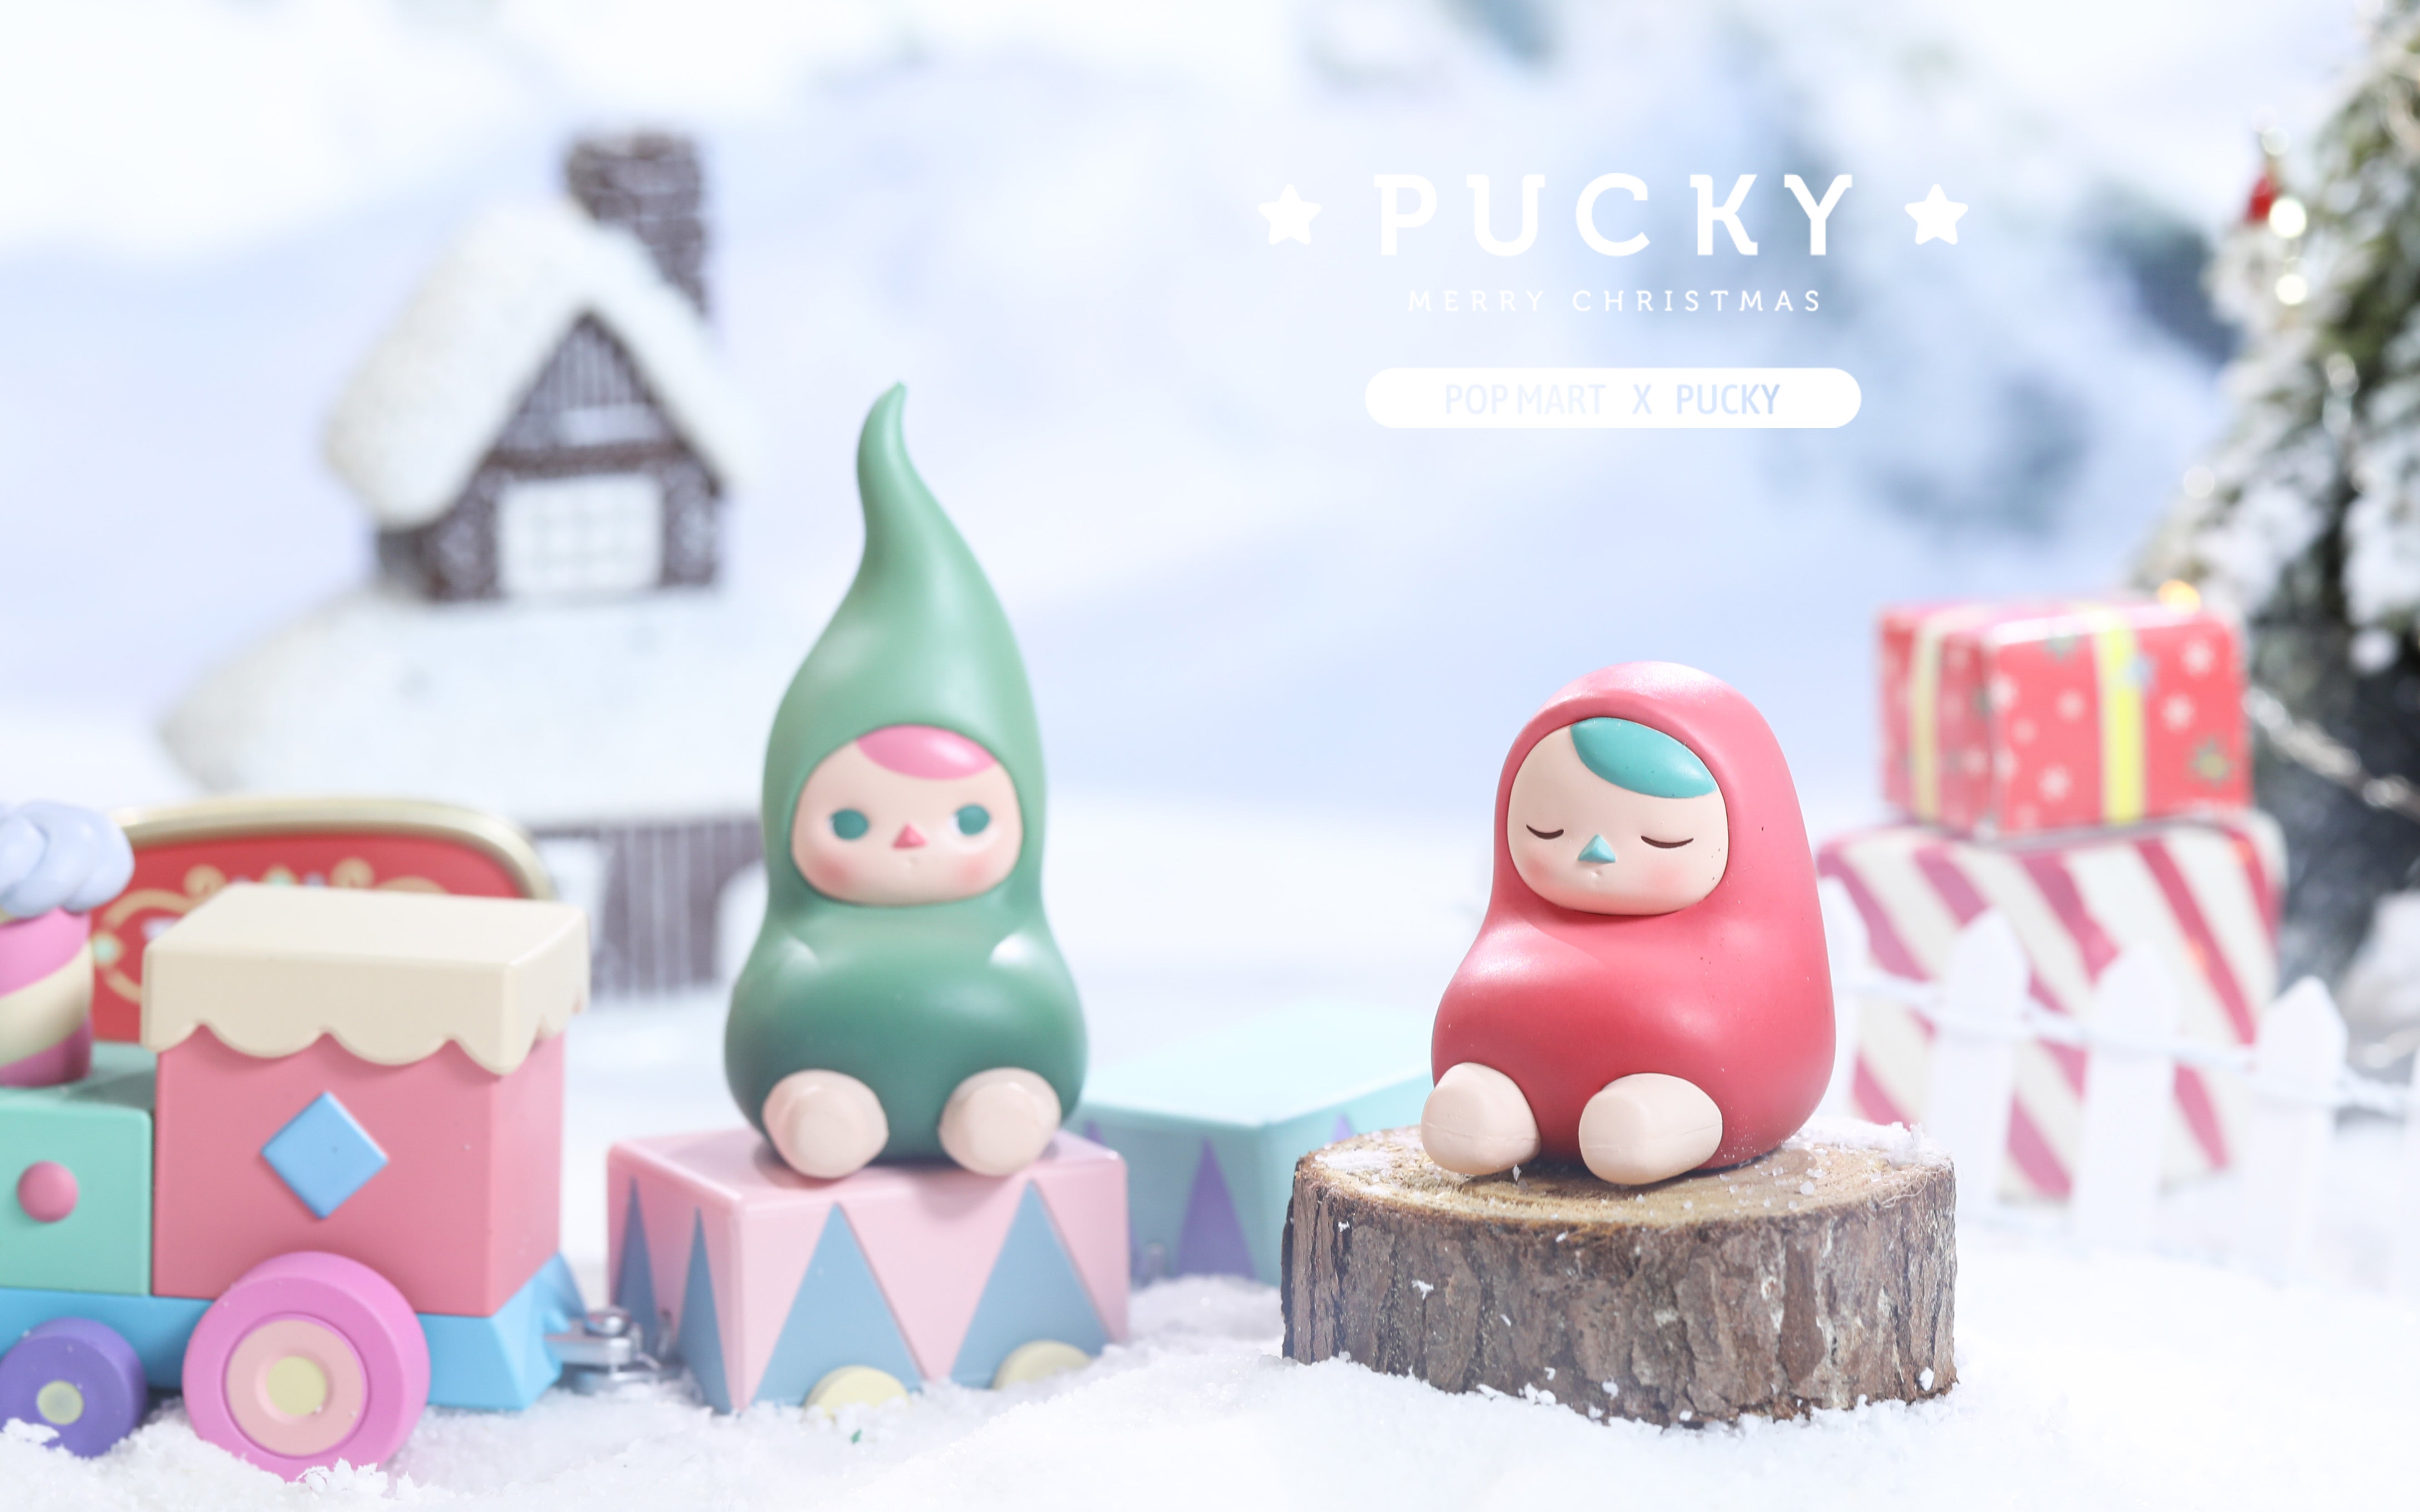 Pucky Merry Christmas Set by Pucky